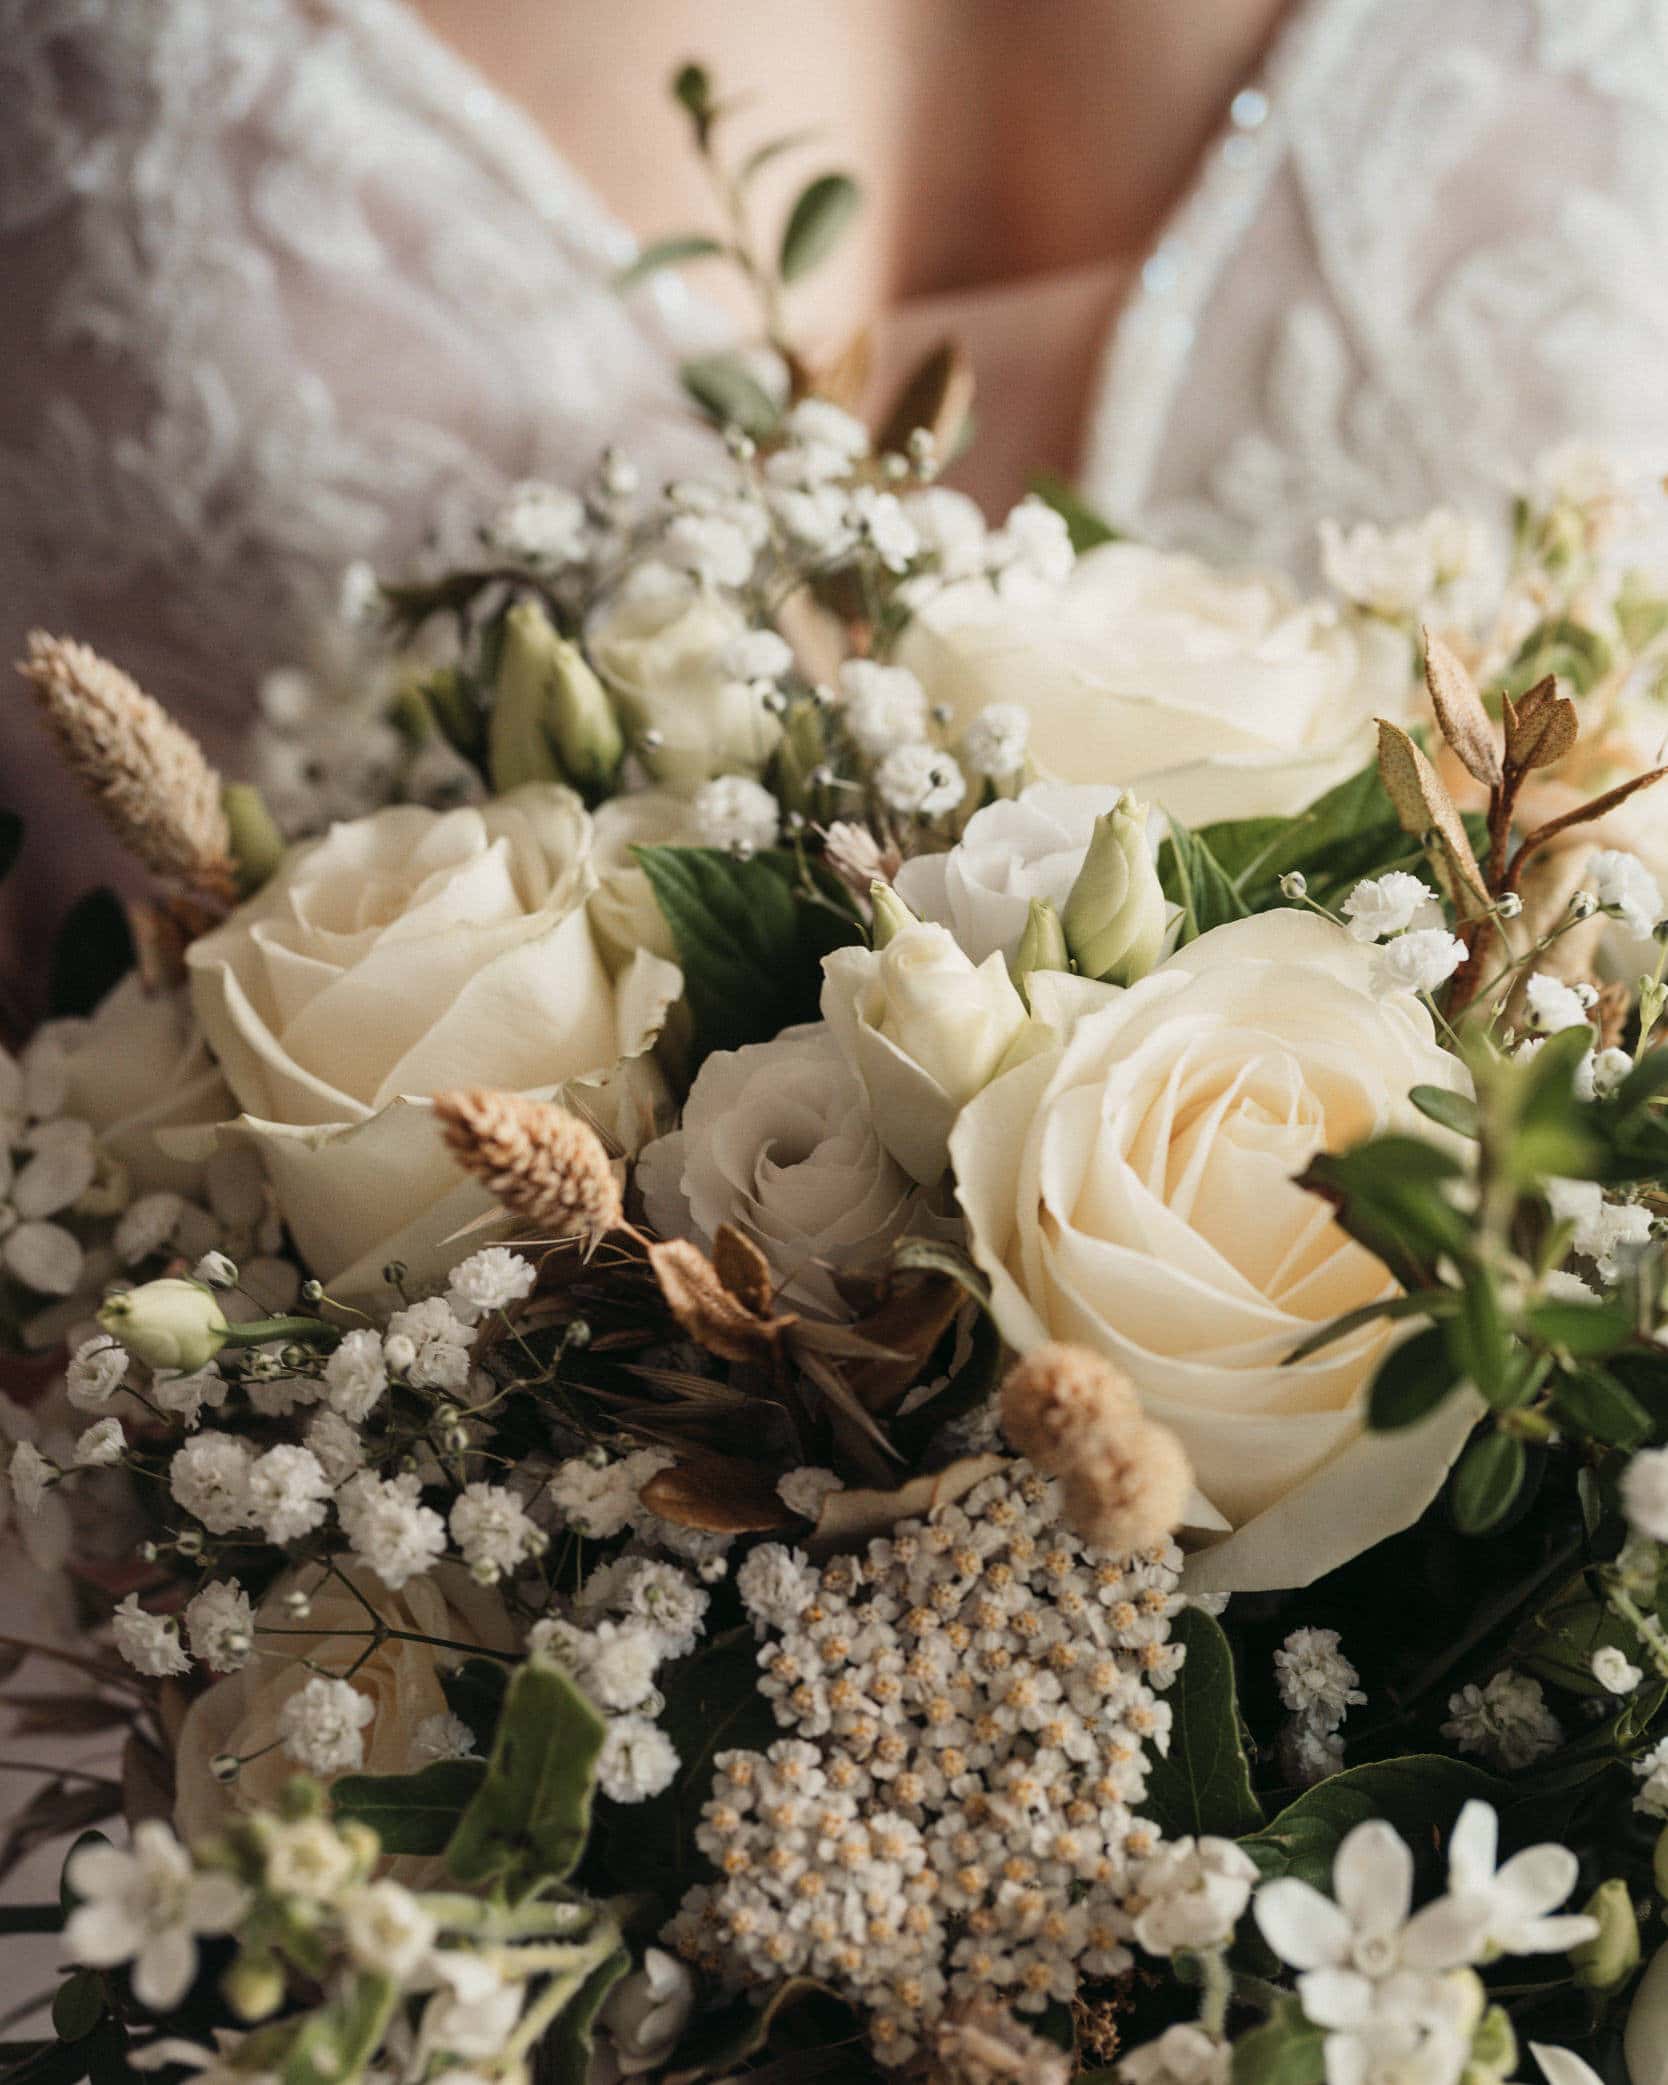 How to hold your wedding bouquet!